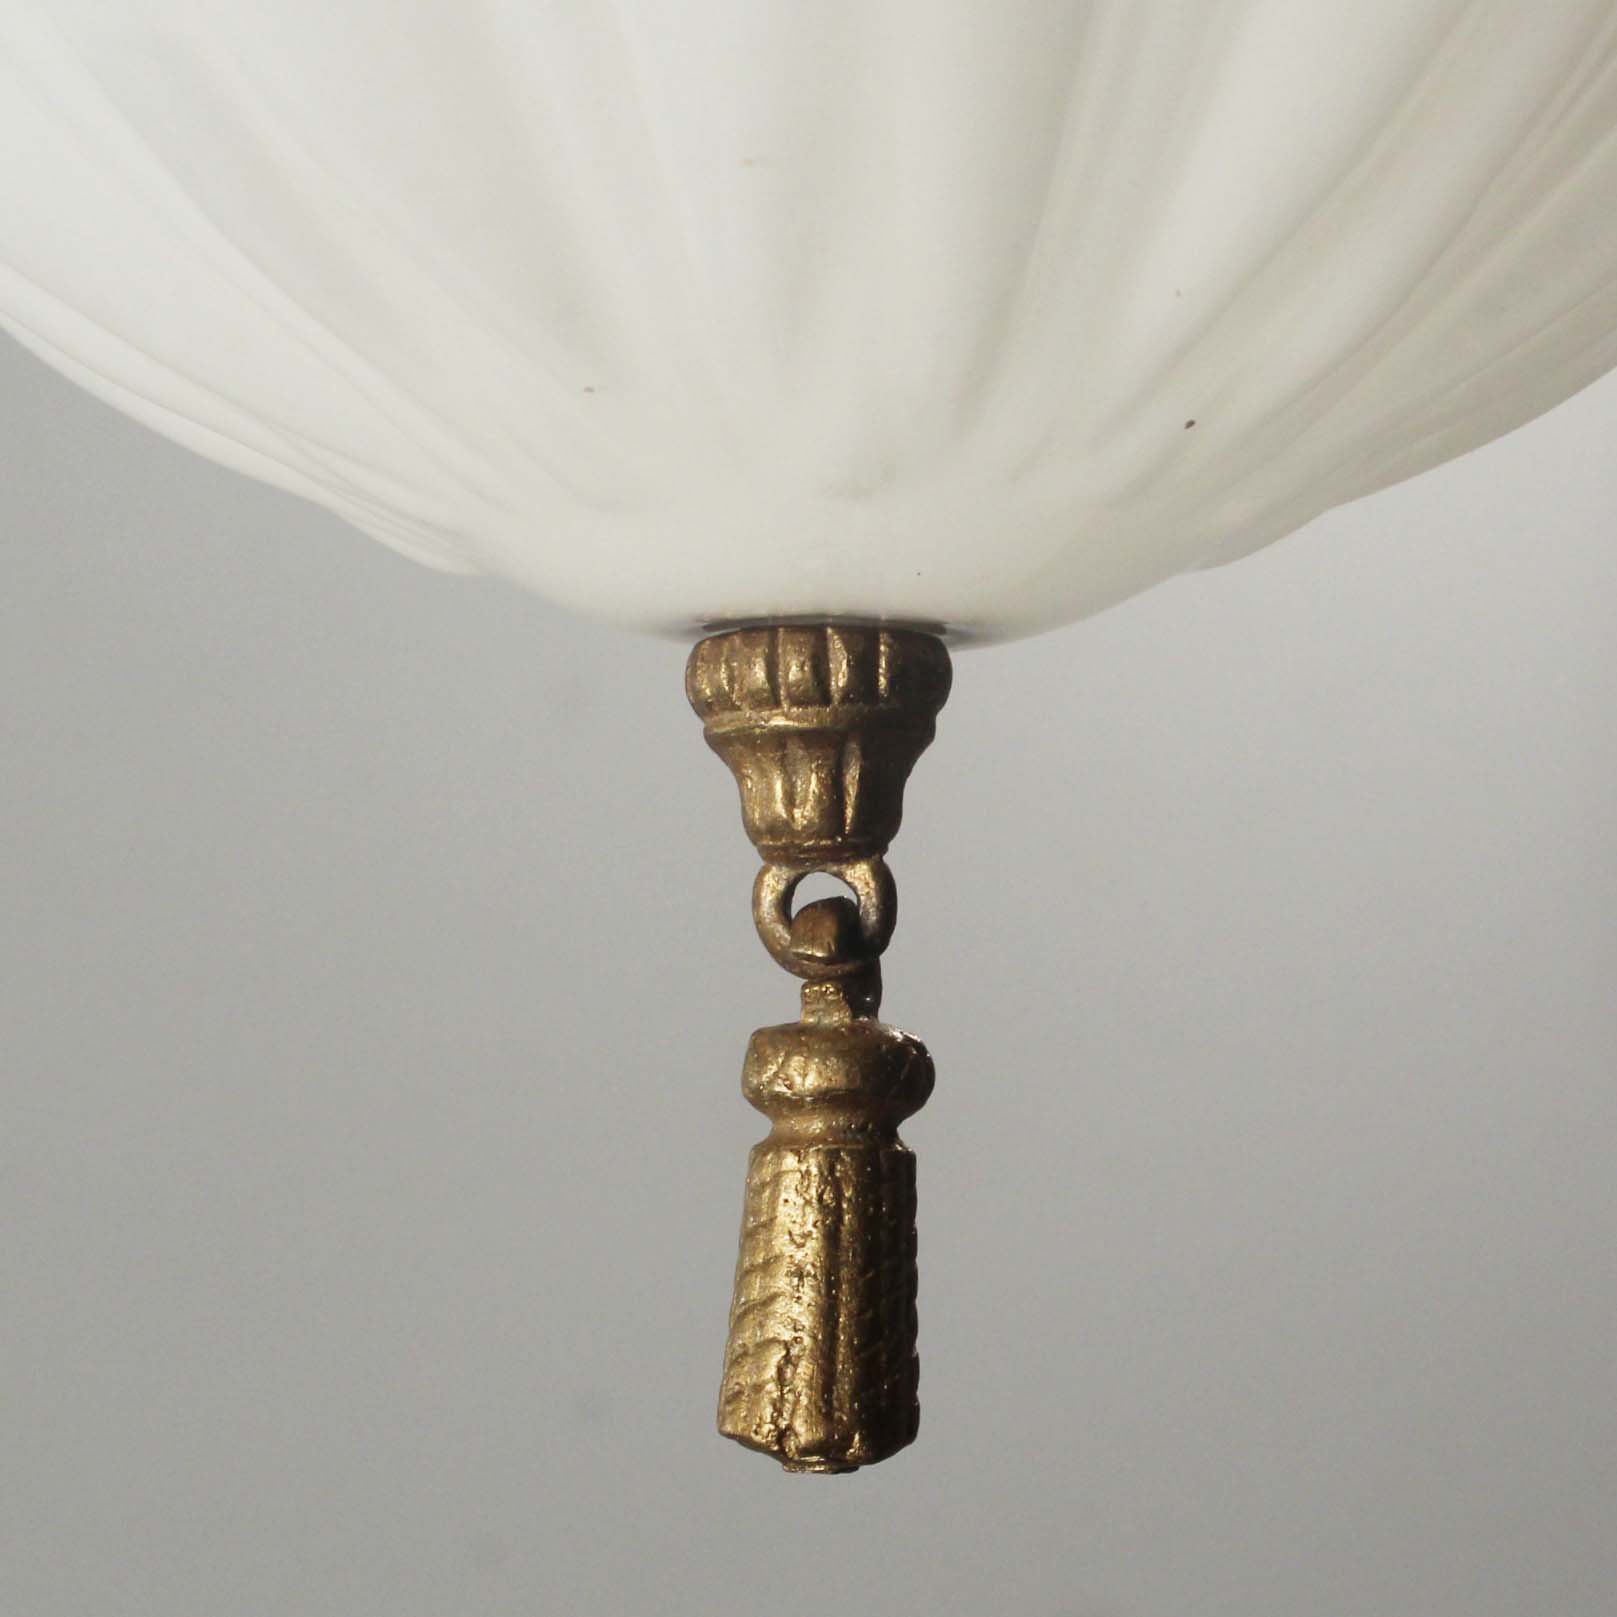 SOLD Antique Neoclassical Pendant Light with Original Shade-67326